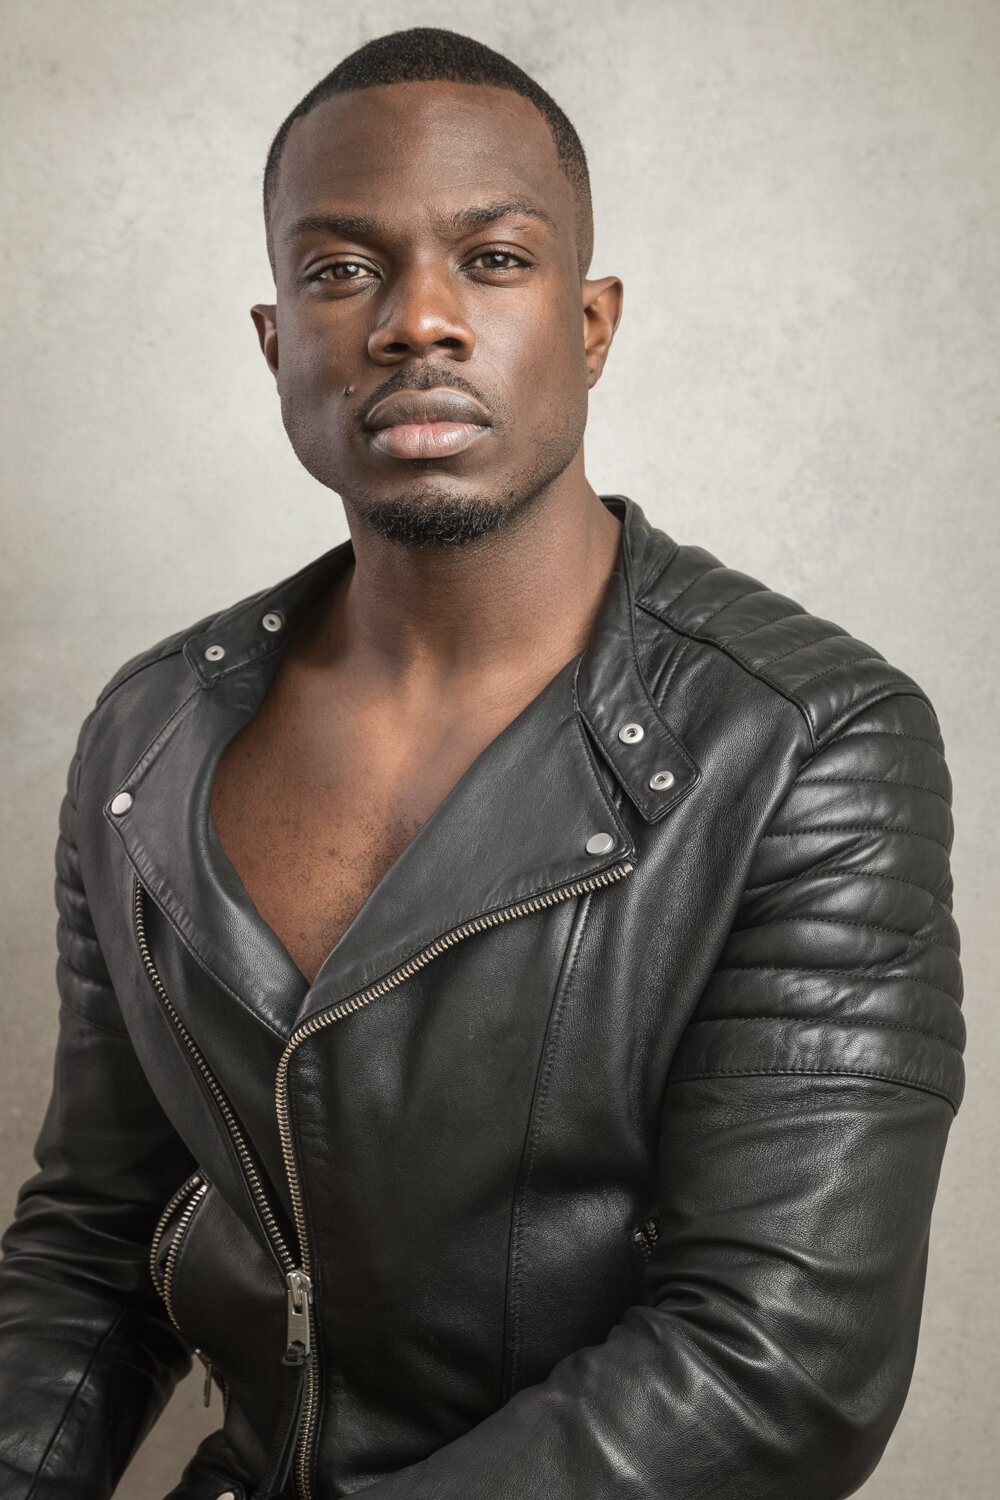 Actor: Stedroy Cabey